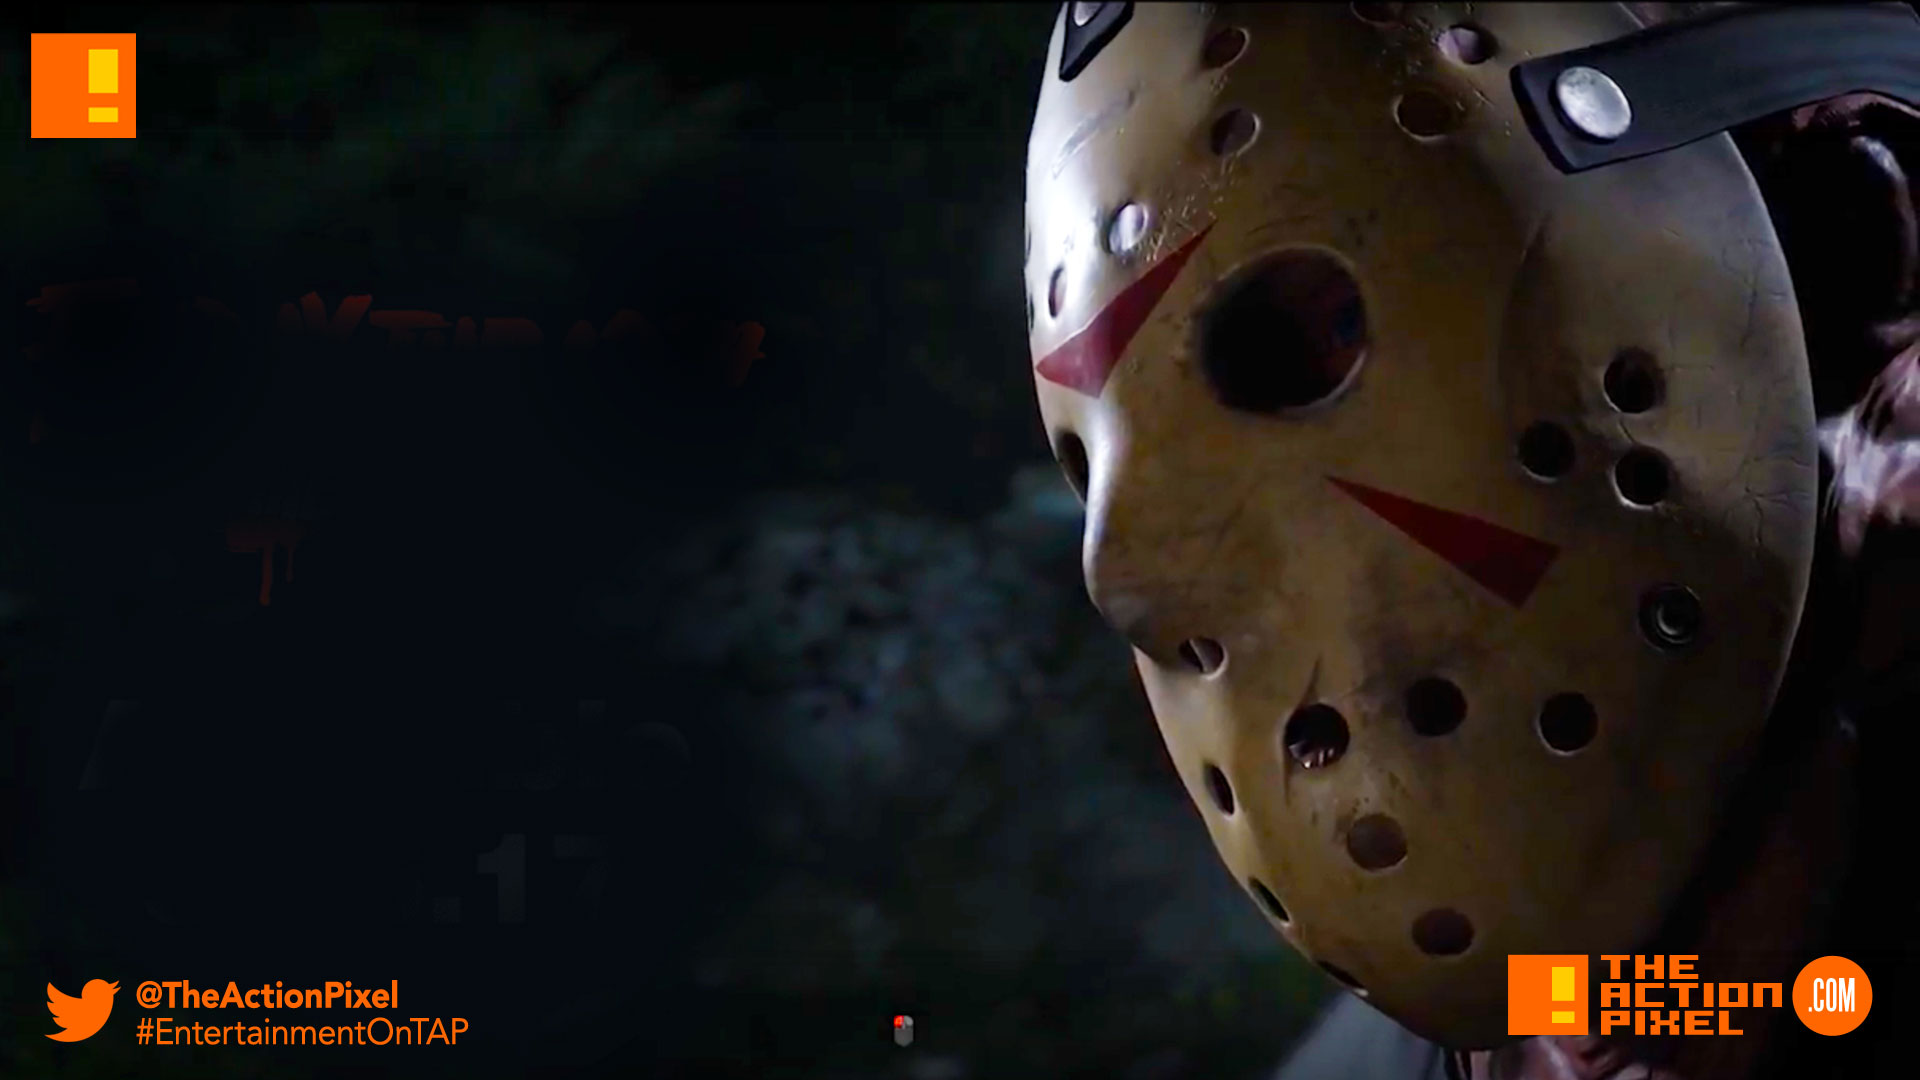 friday the 13th: the game, the pamela tapes, vol. 1 , vol. 2,vol 1, vol 2, gun media, illfonic,FRIDAY THE 13, JASON VOORHEES, ill fonic, friday the 13th: the game, friday the 13th, gun media, trailer, launch date, announcement,